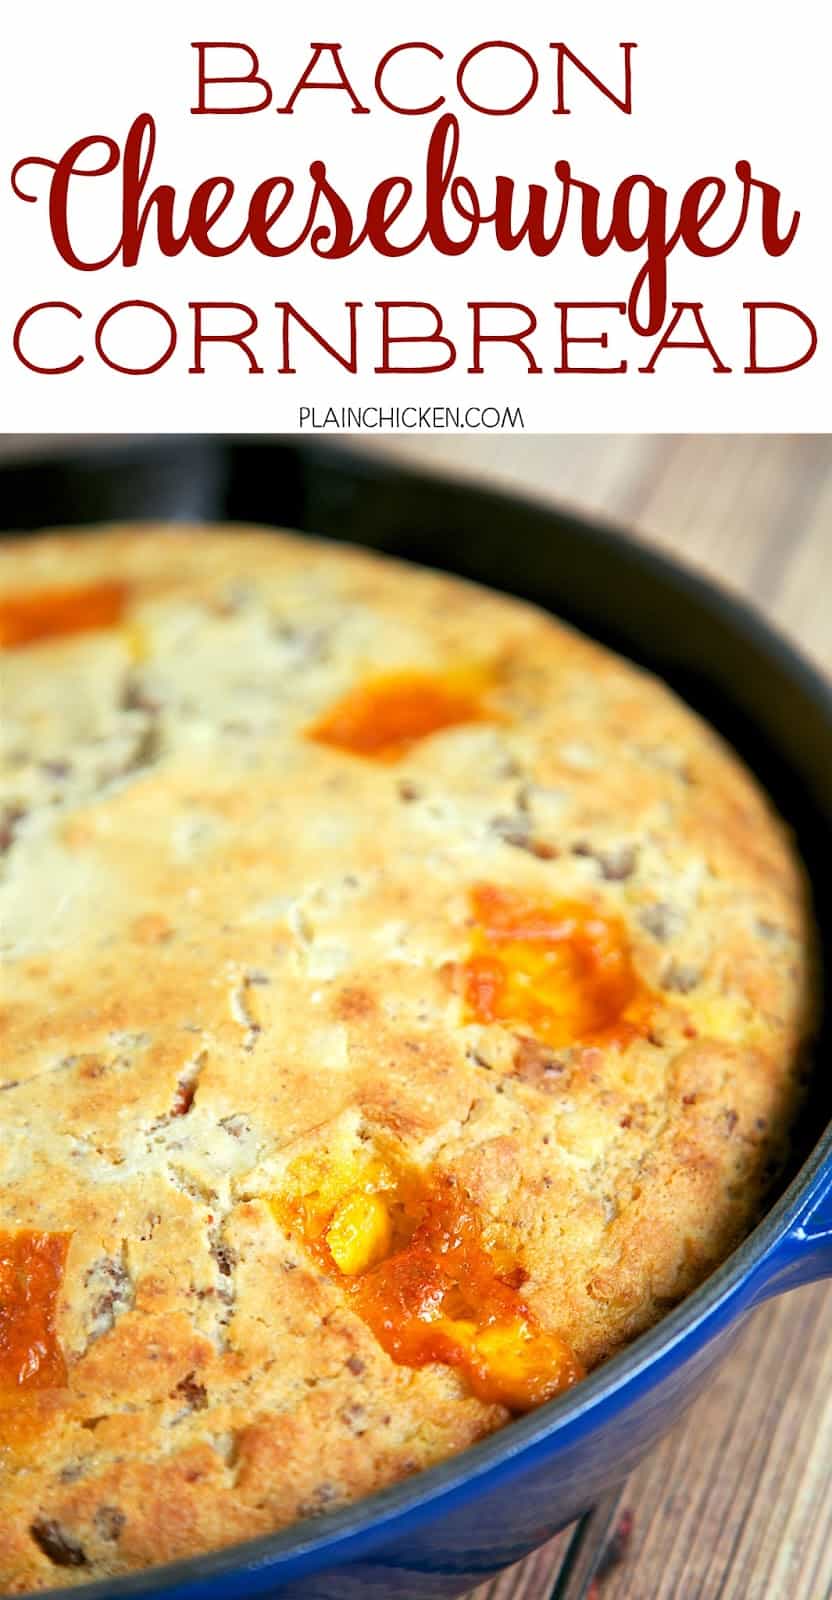 Bacon Cheeseburger Cornbread - comfort food at its best! Homemade Southern buttermilk cornbread loaded with hamburger meat, bacon and cheddar cheese. The chunks of ooey gooey melted cheese are the star of this dish! Serve with a salad for a quick and easy weeknight meal!! Also makes a great dish for a potluck.